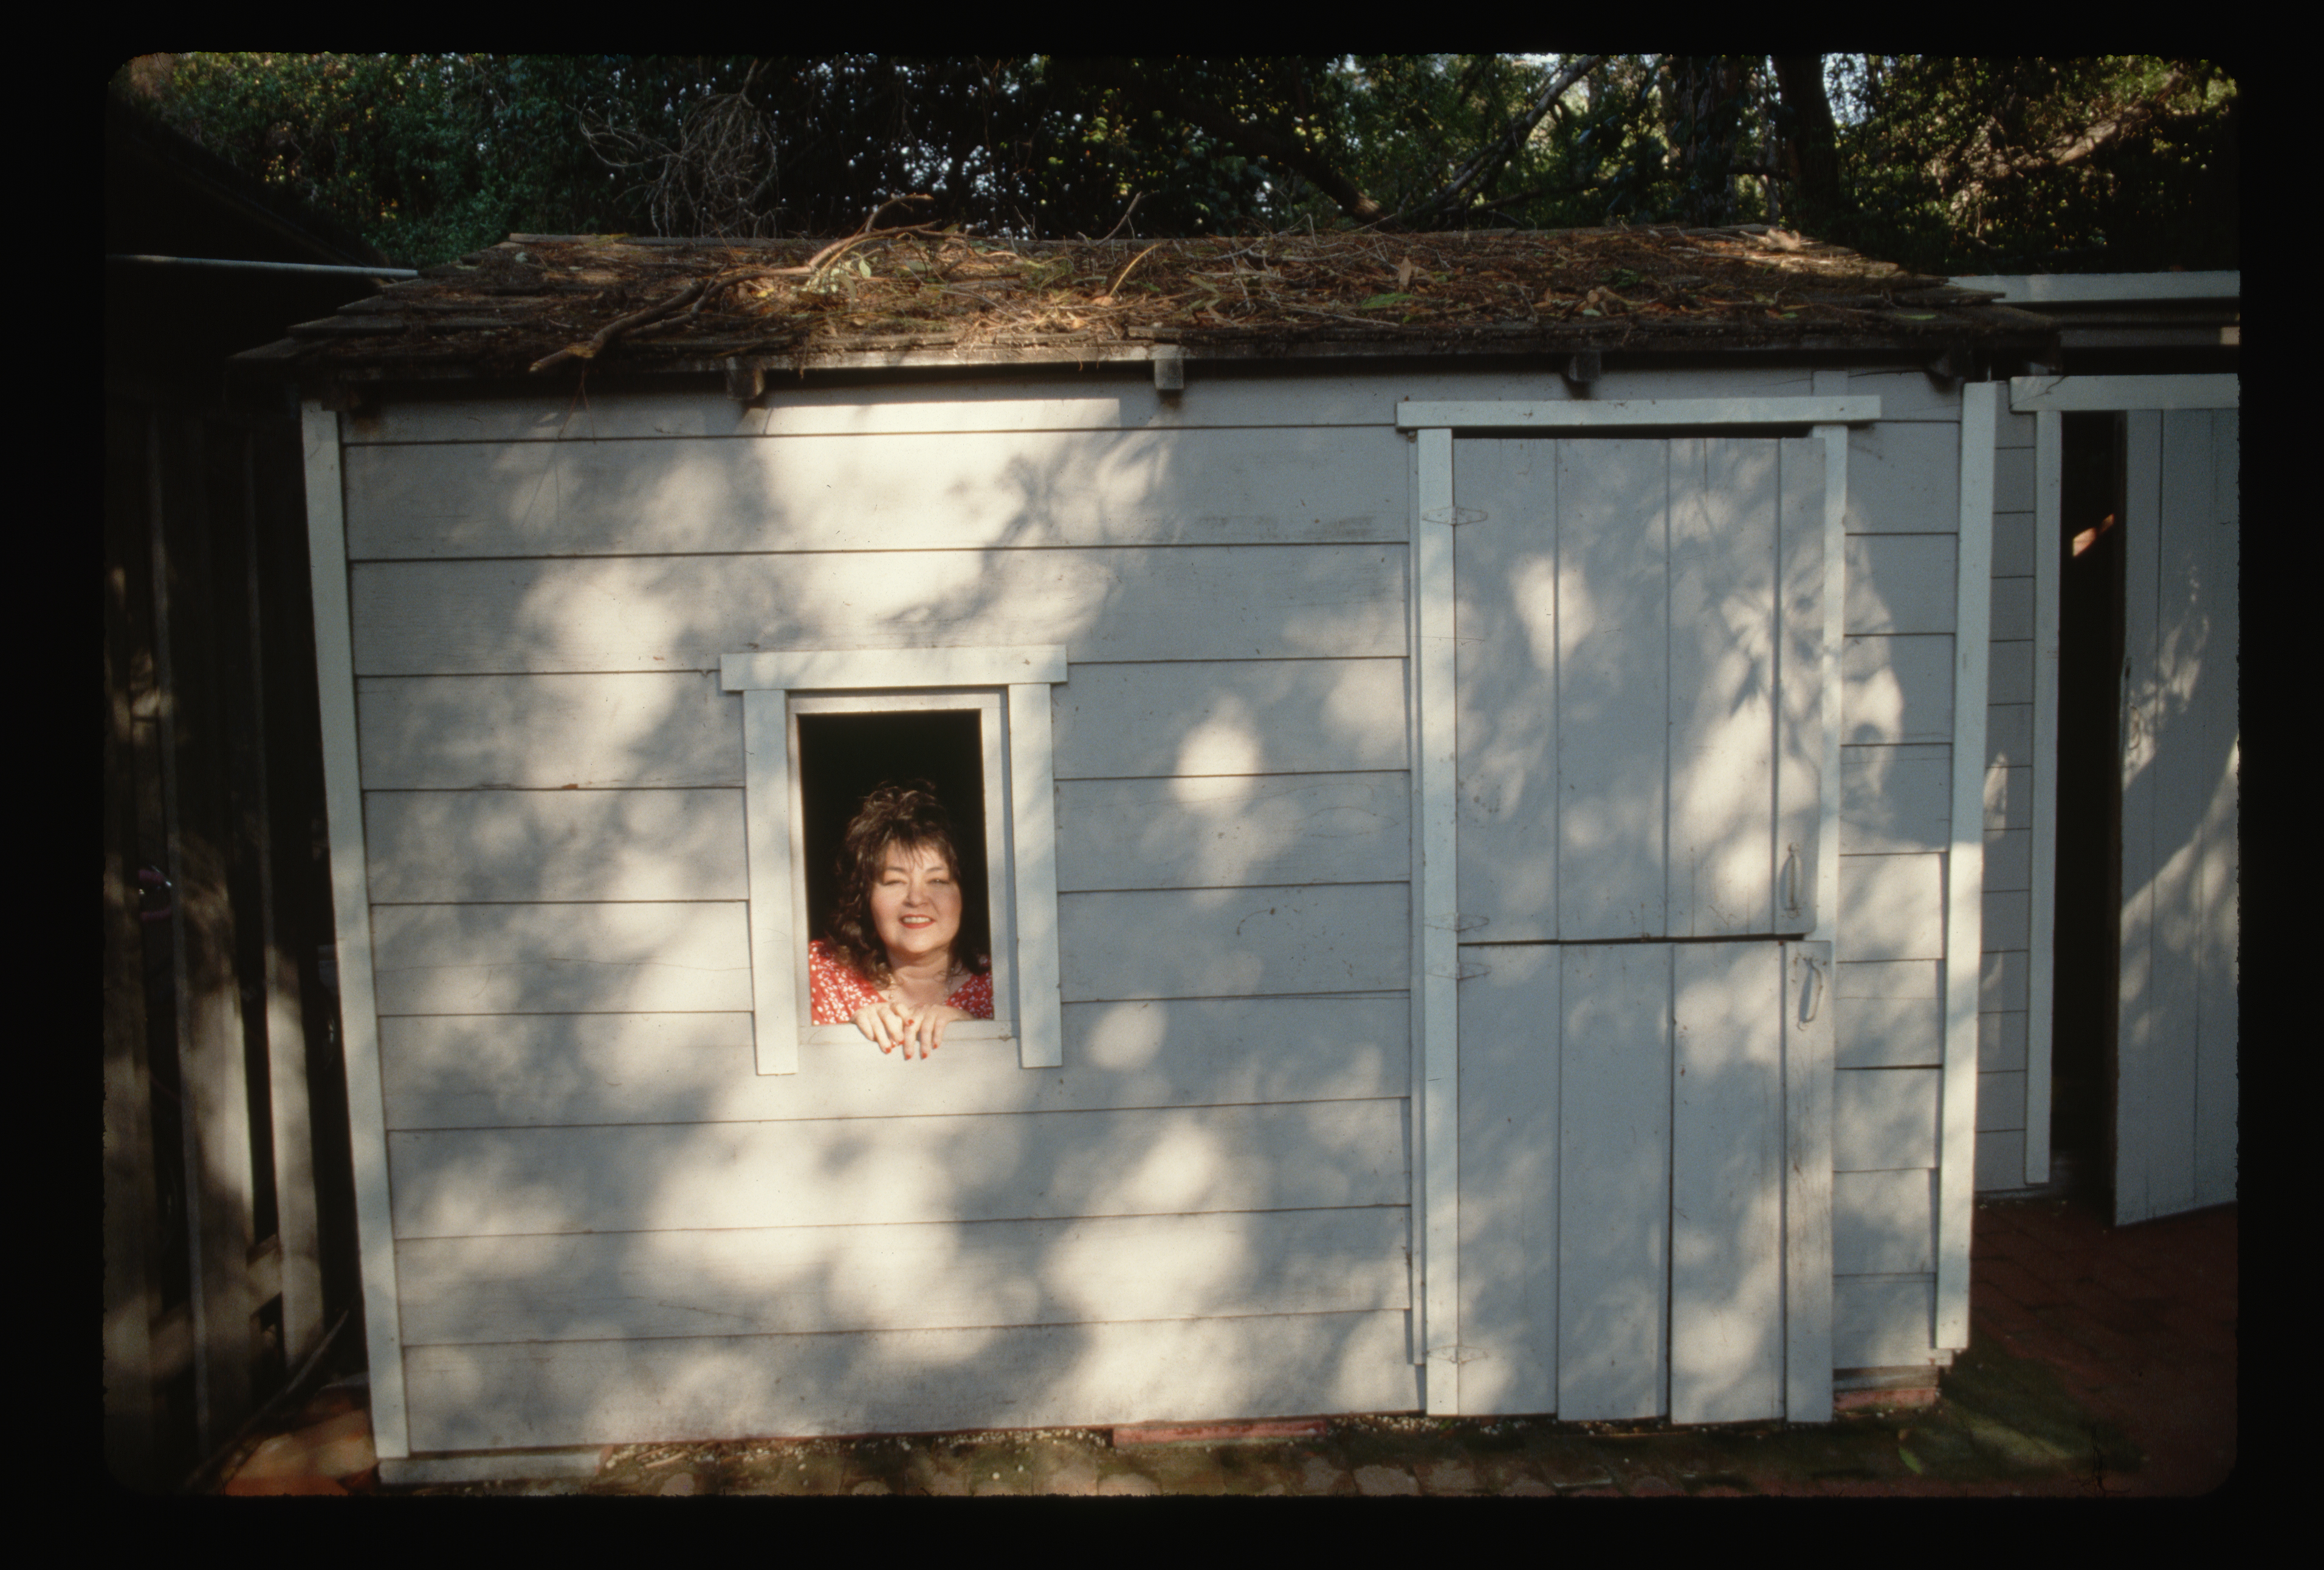 Comedian Roseanne Barr peekin through a window of a shed, circa 1989 |  Source: Getty Images